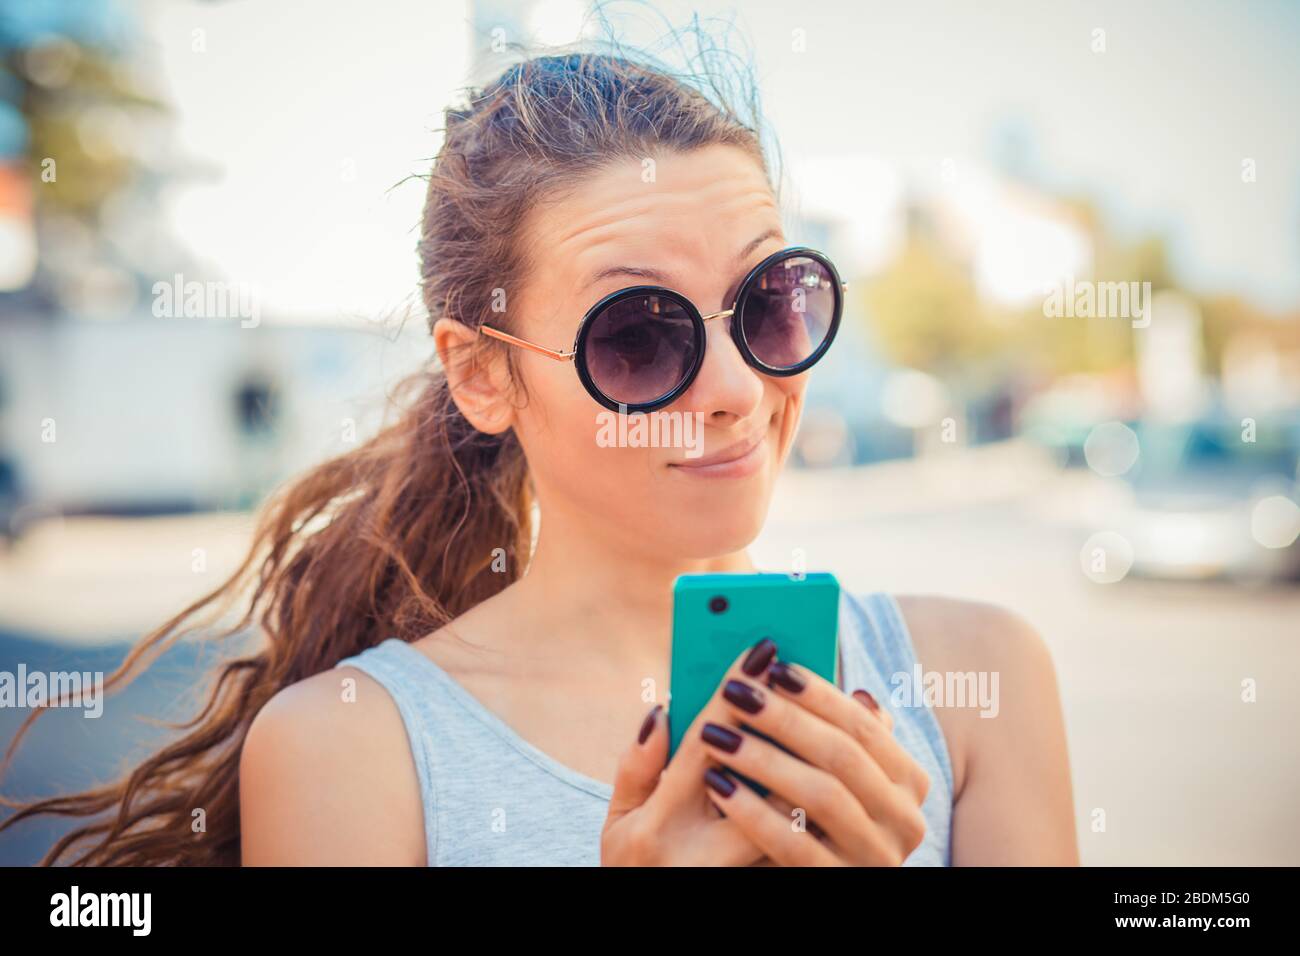 Closeup portrait upset sad, skeptical, unhappy, serious woman talking texting on phone displeased with conversation isolated outdoor background. Negat Stock Photo